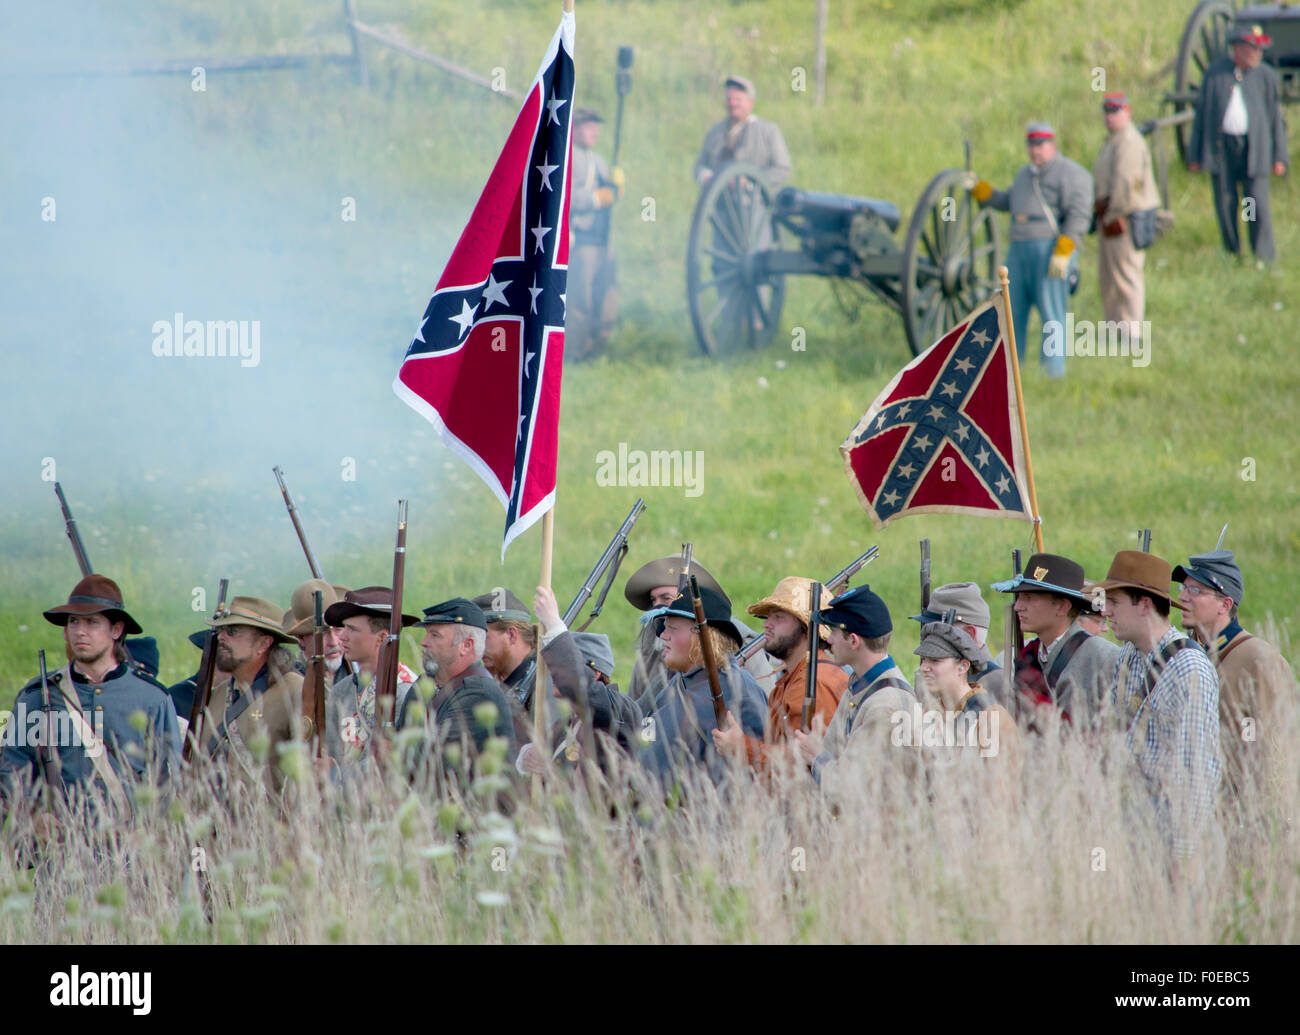 Gettysburg Confederate Army marching through fields with flags, cannons in background. Stock Photo